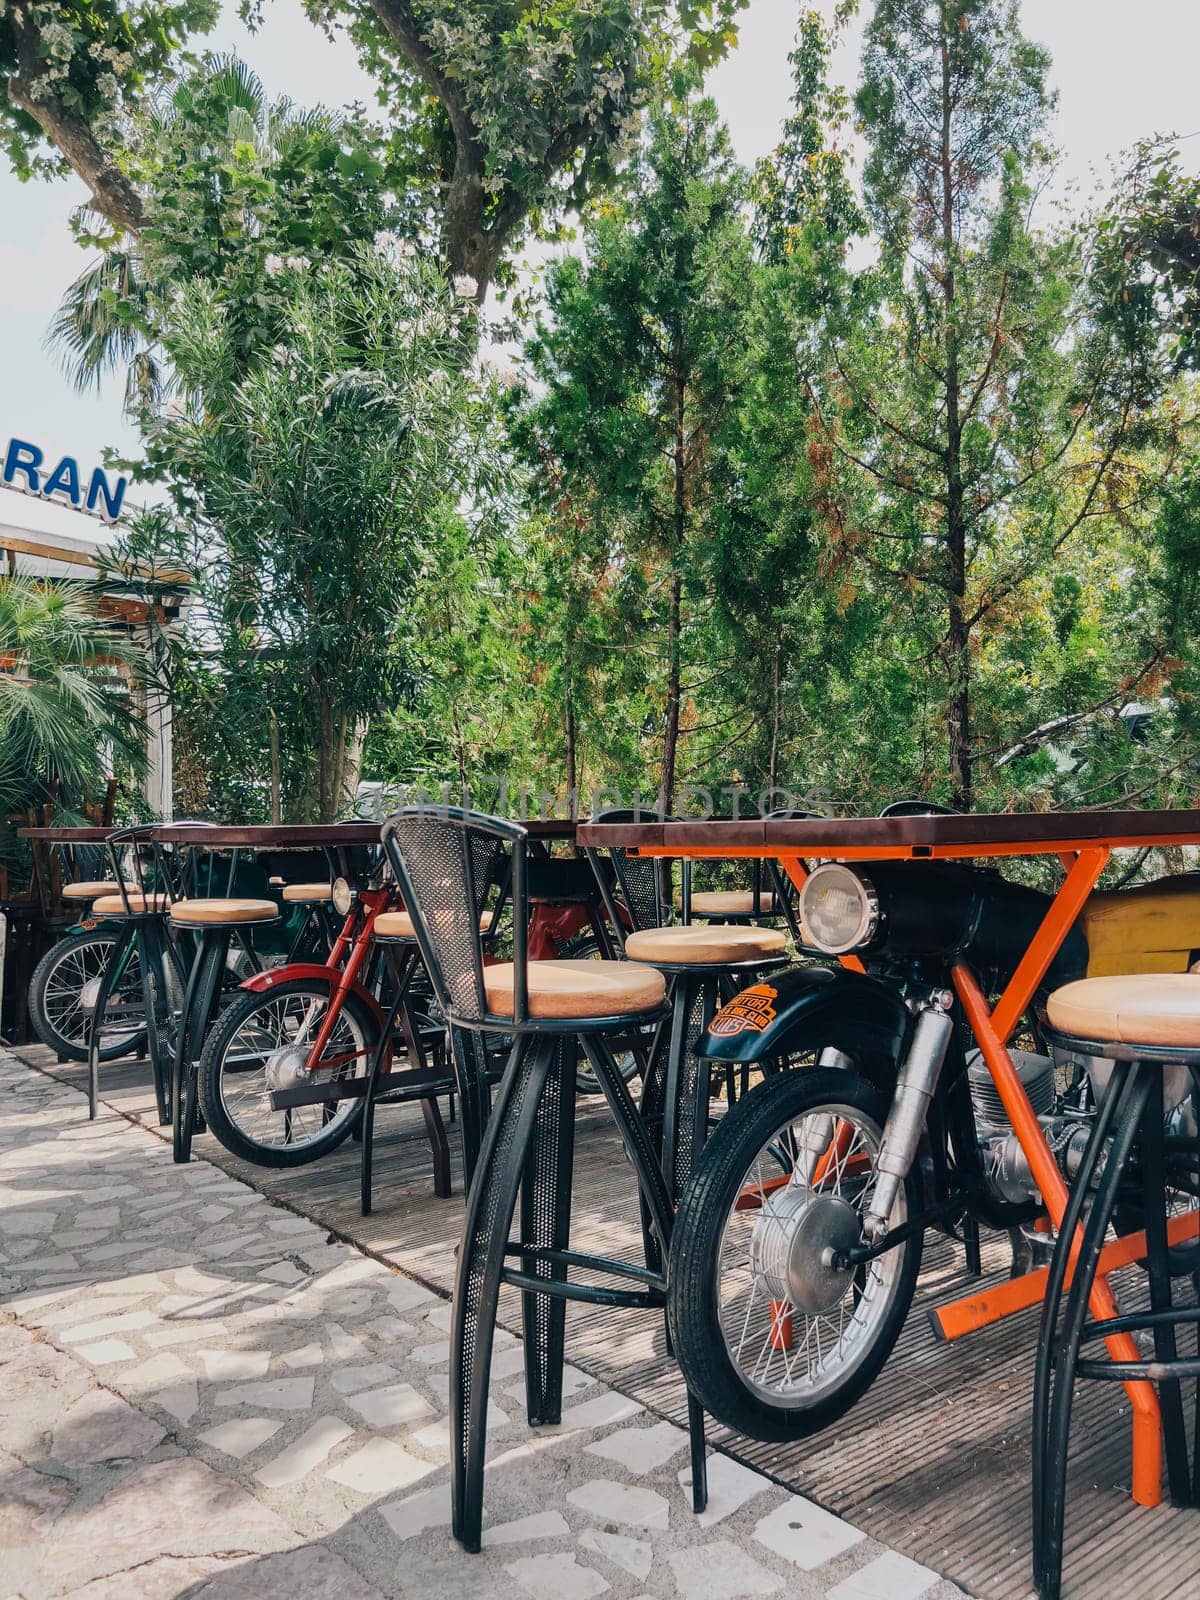 Tables in a street cafe on retro motorcycles. High quality photo